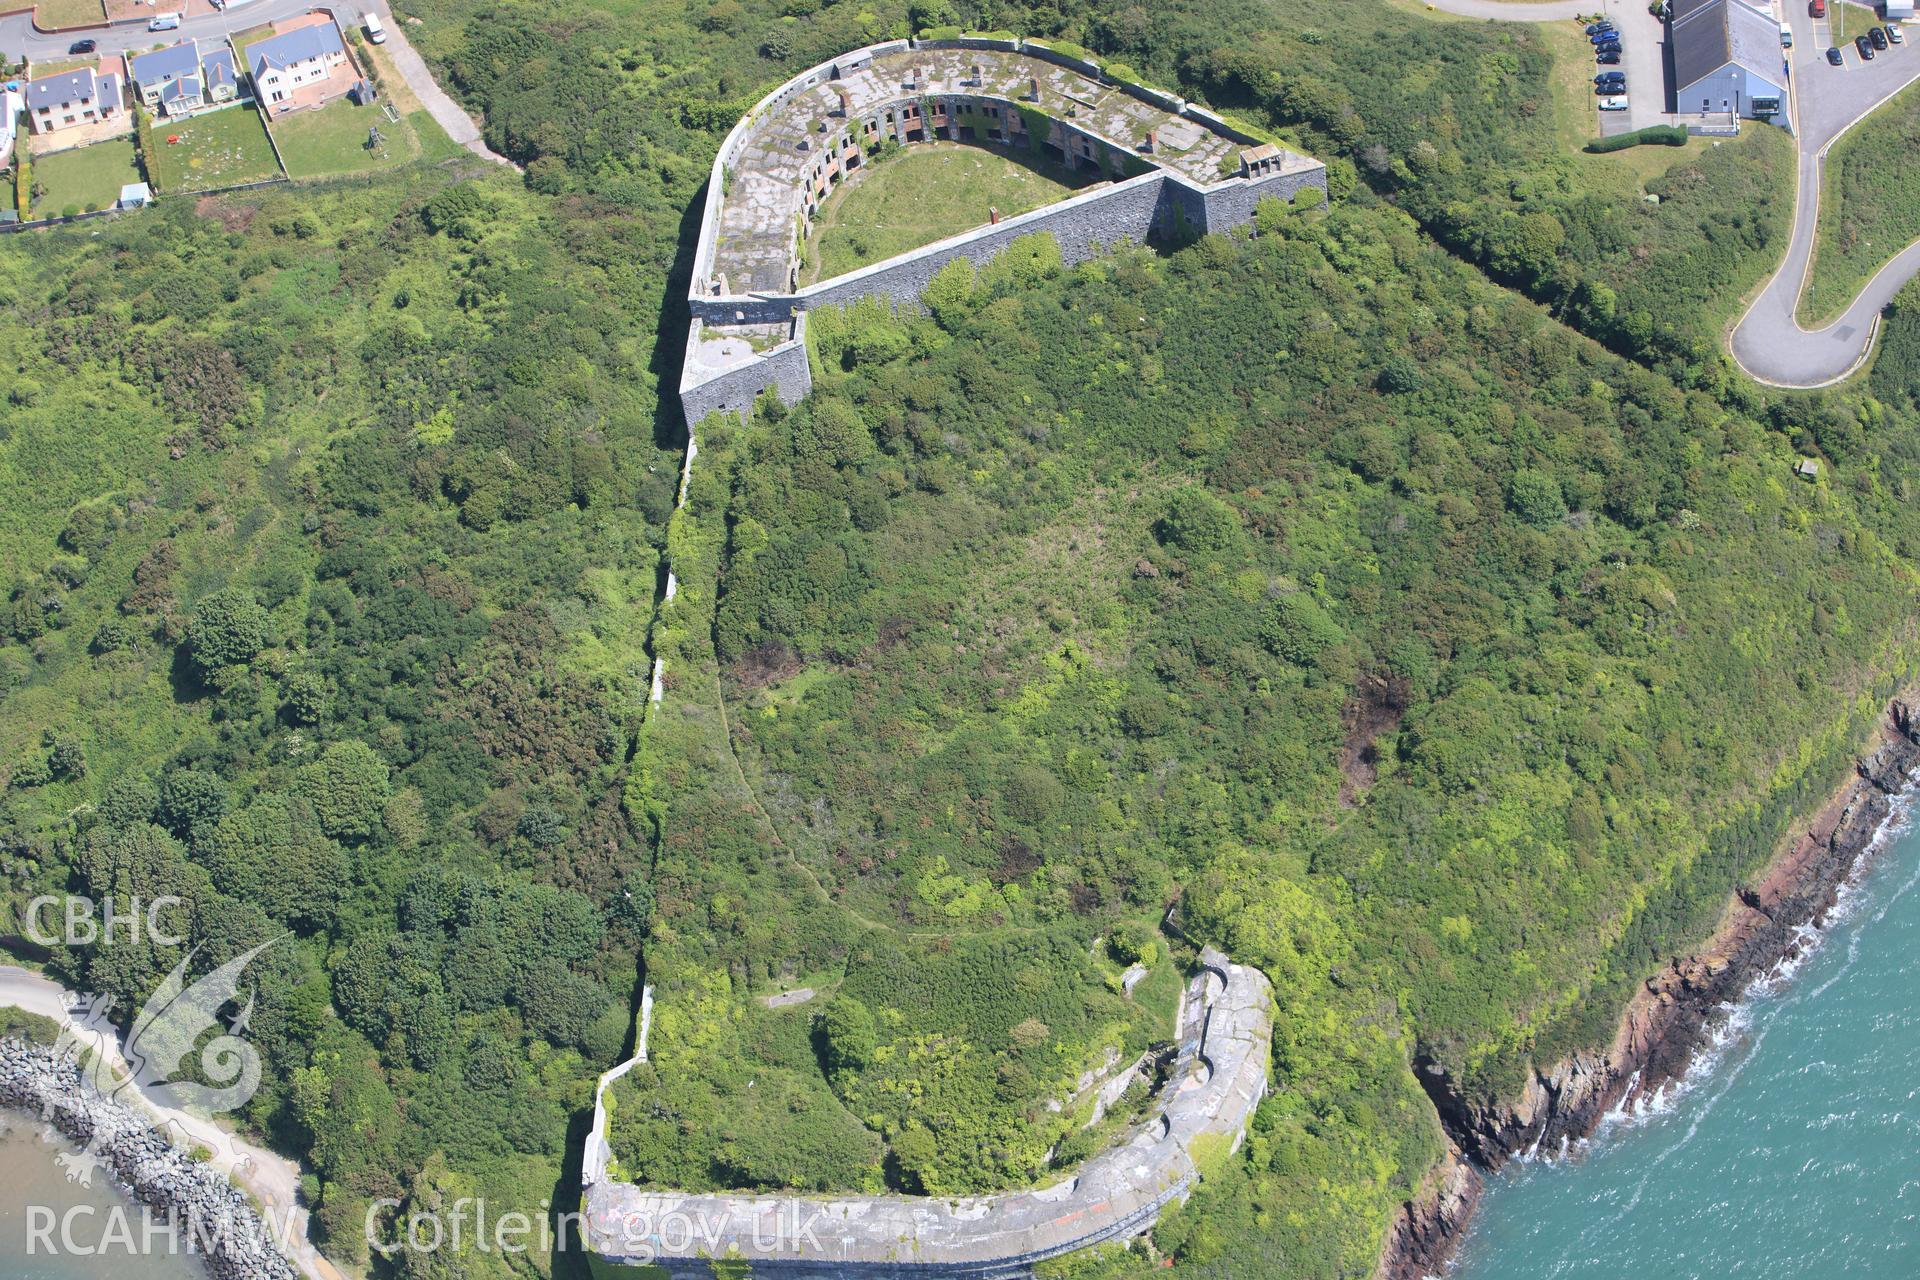 RCAHMW colour oblique photograph of Fort Hubberston. Taken by Toby Driver on 24/05/2011.